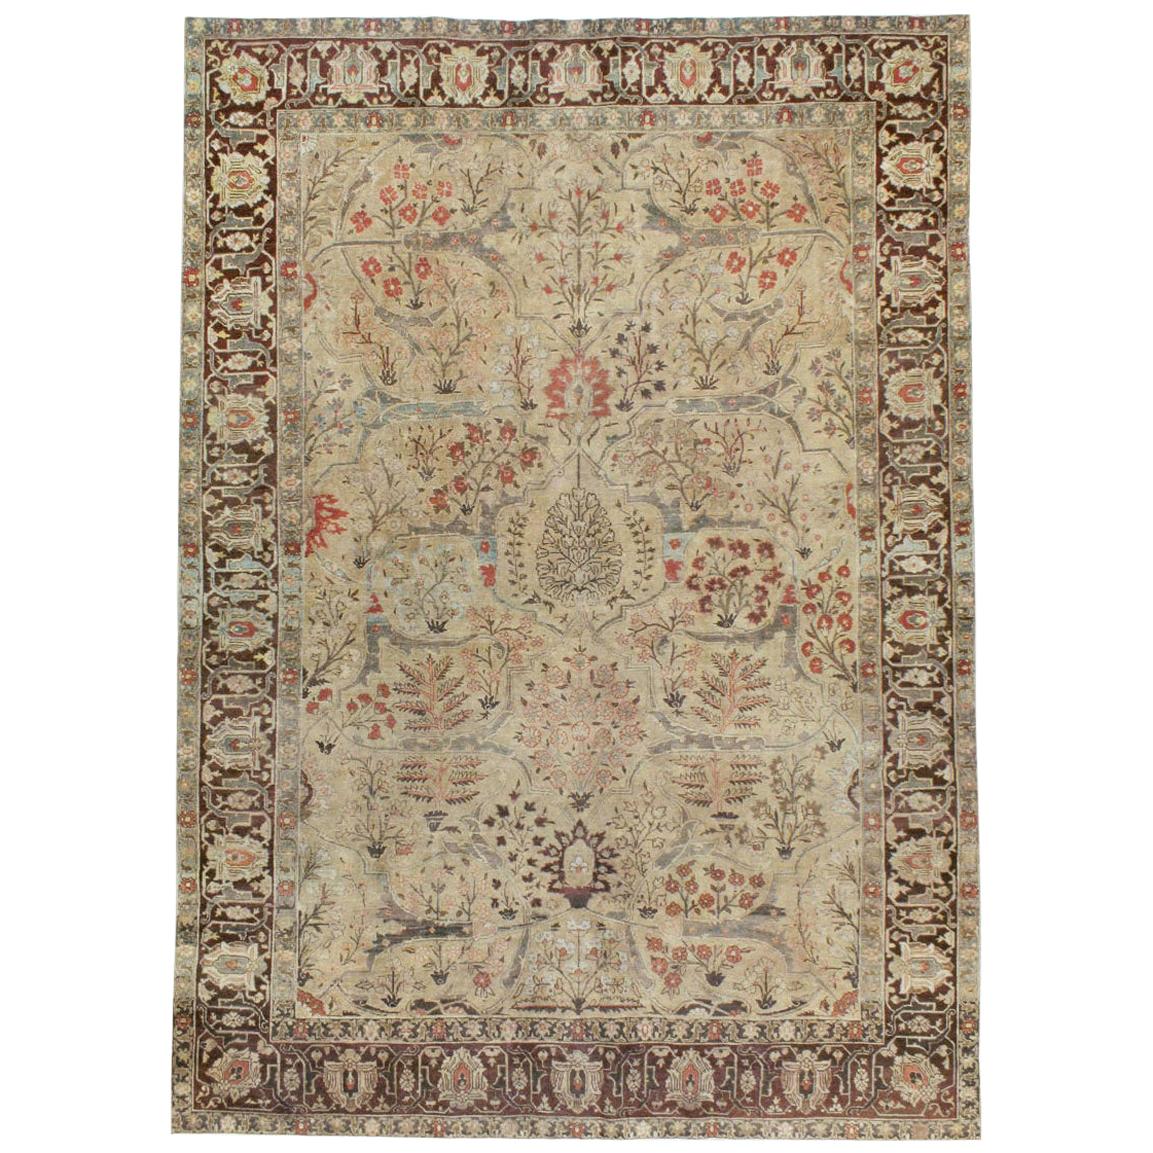 Early 20th Century Persian Tabriz Small Room Size Carpet in Maroon and Brown